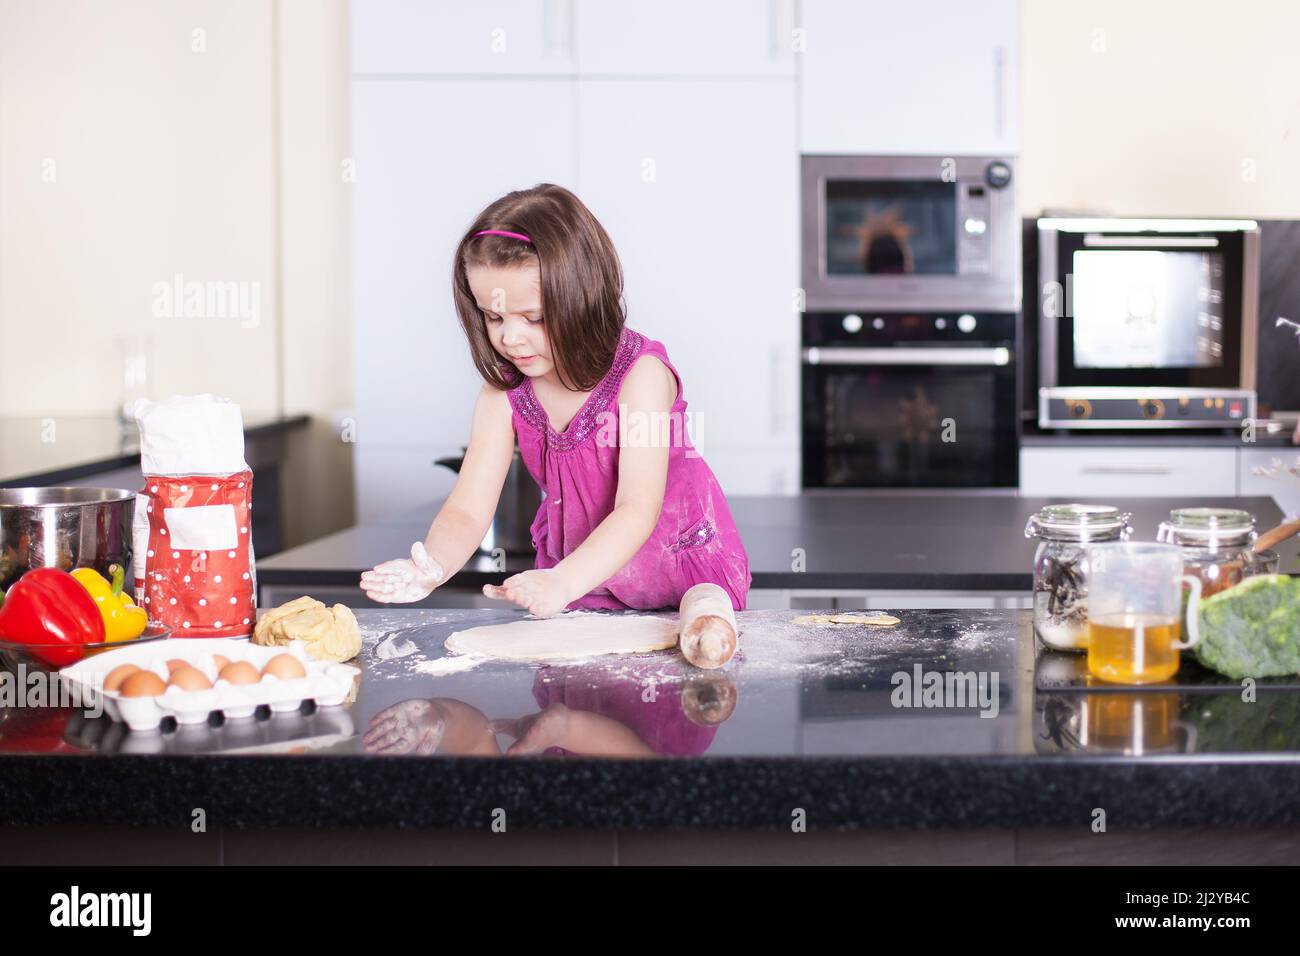 Cute little child cooking food in kitchen Stock Photo